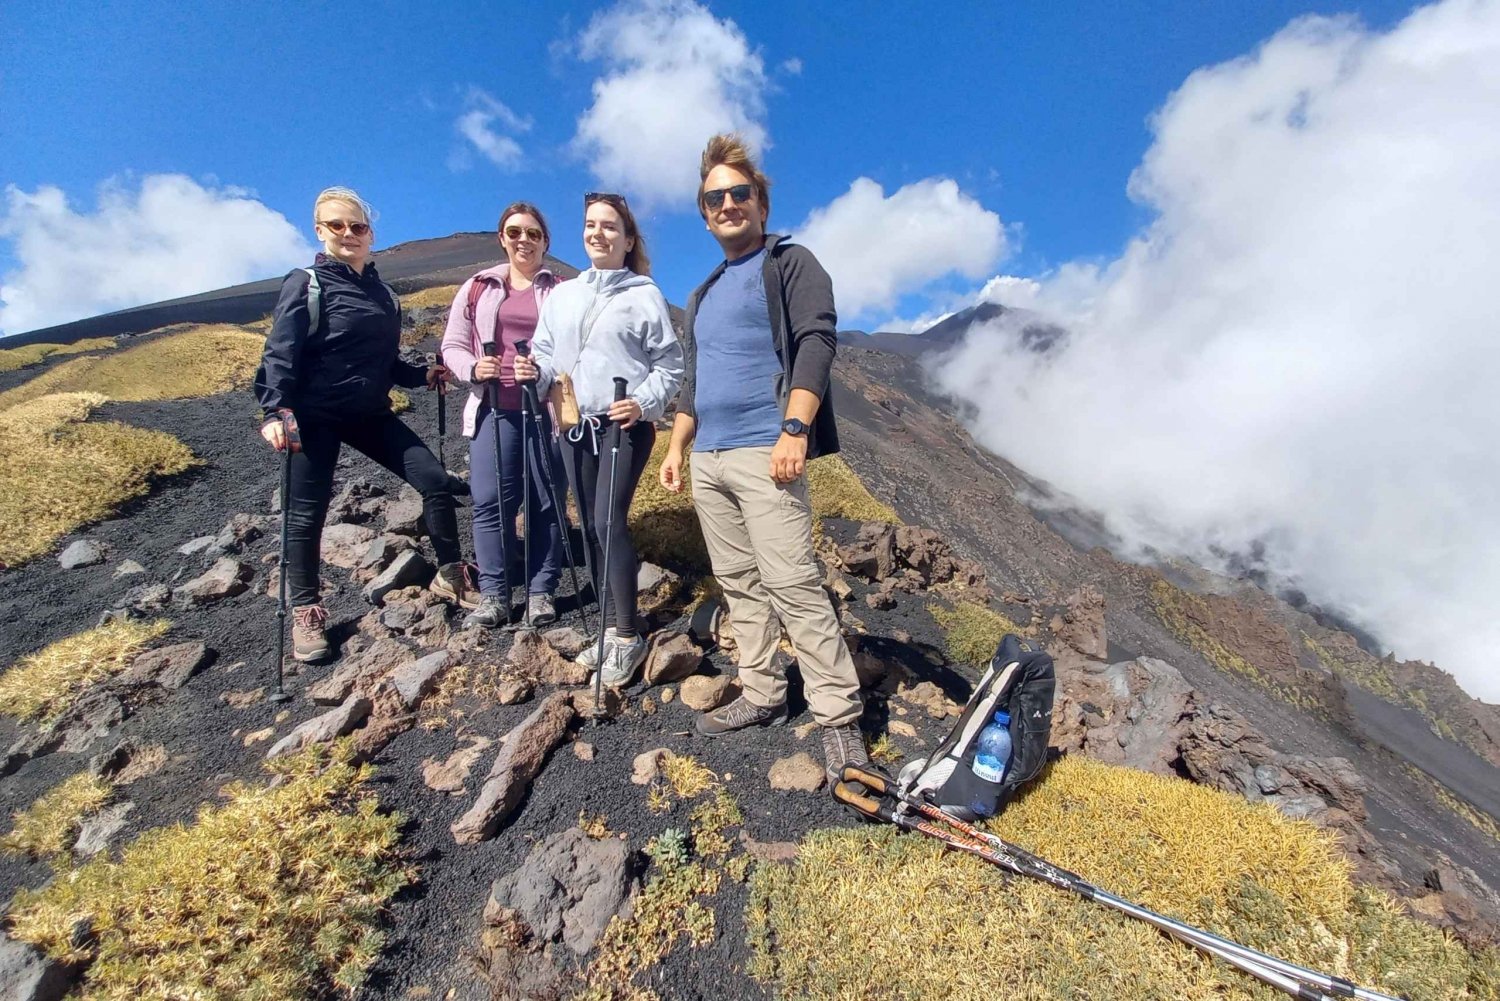 Etna trekking and tasting- medium difficulty-From Syracuse